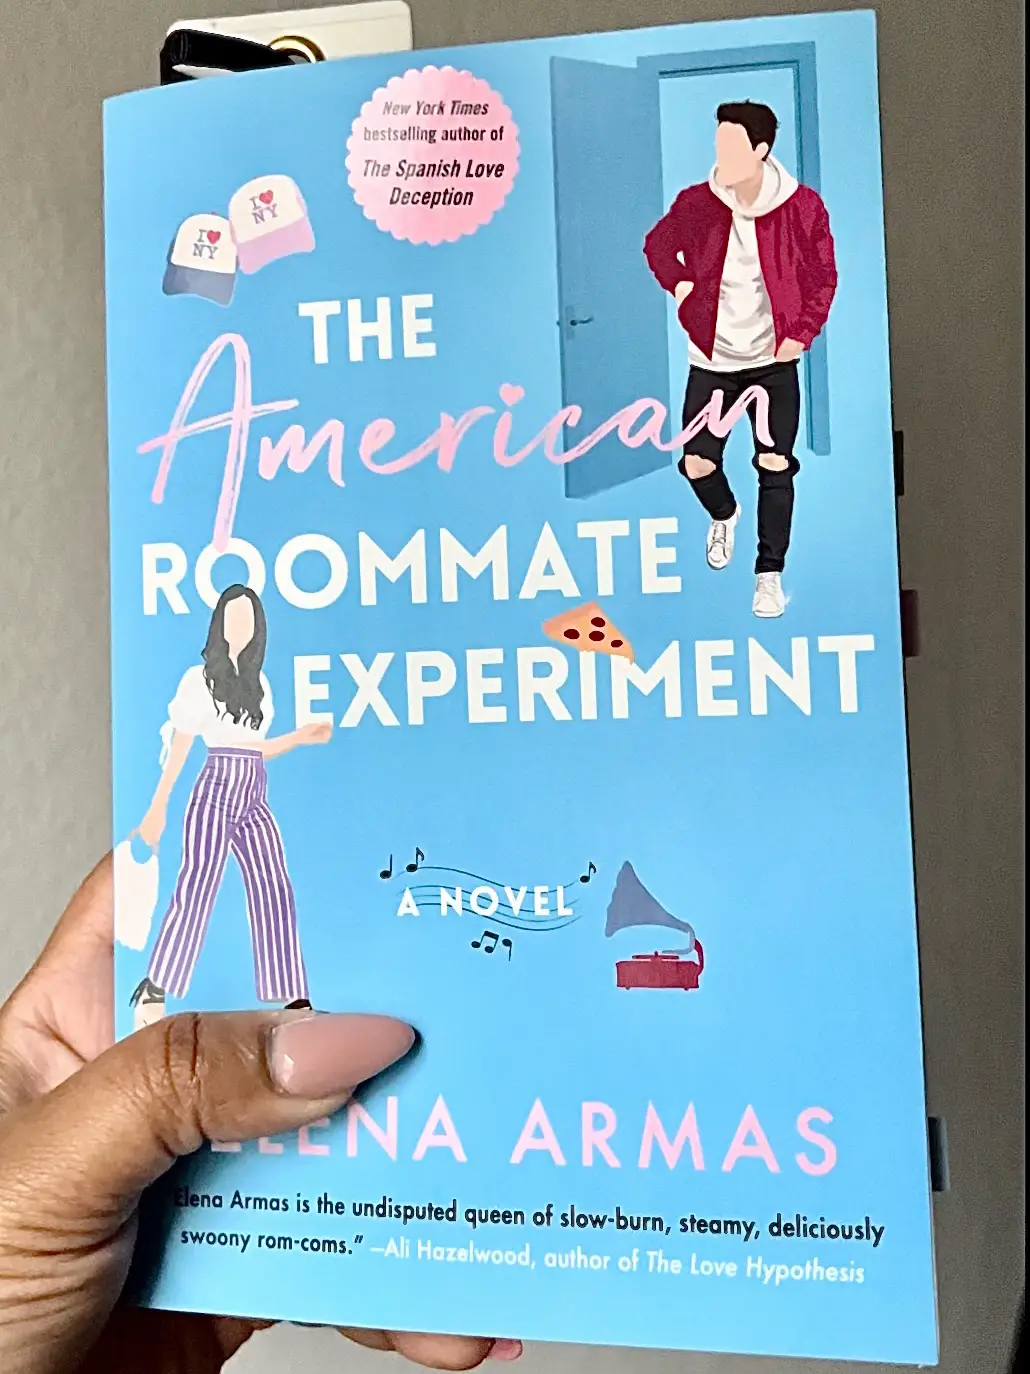 The American Roommate Experiment by Elena Armas – Owl Abridged